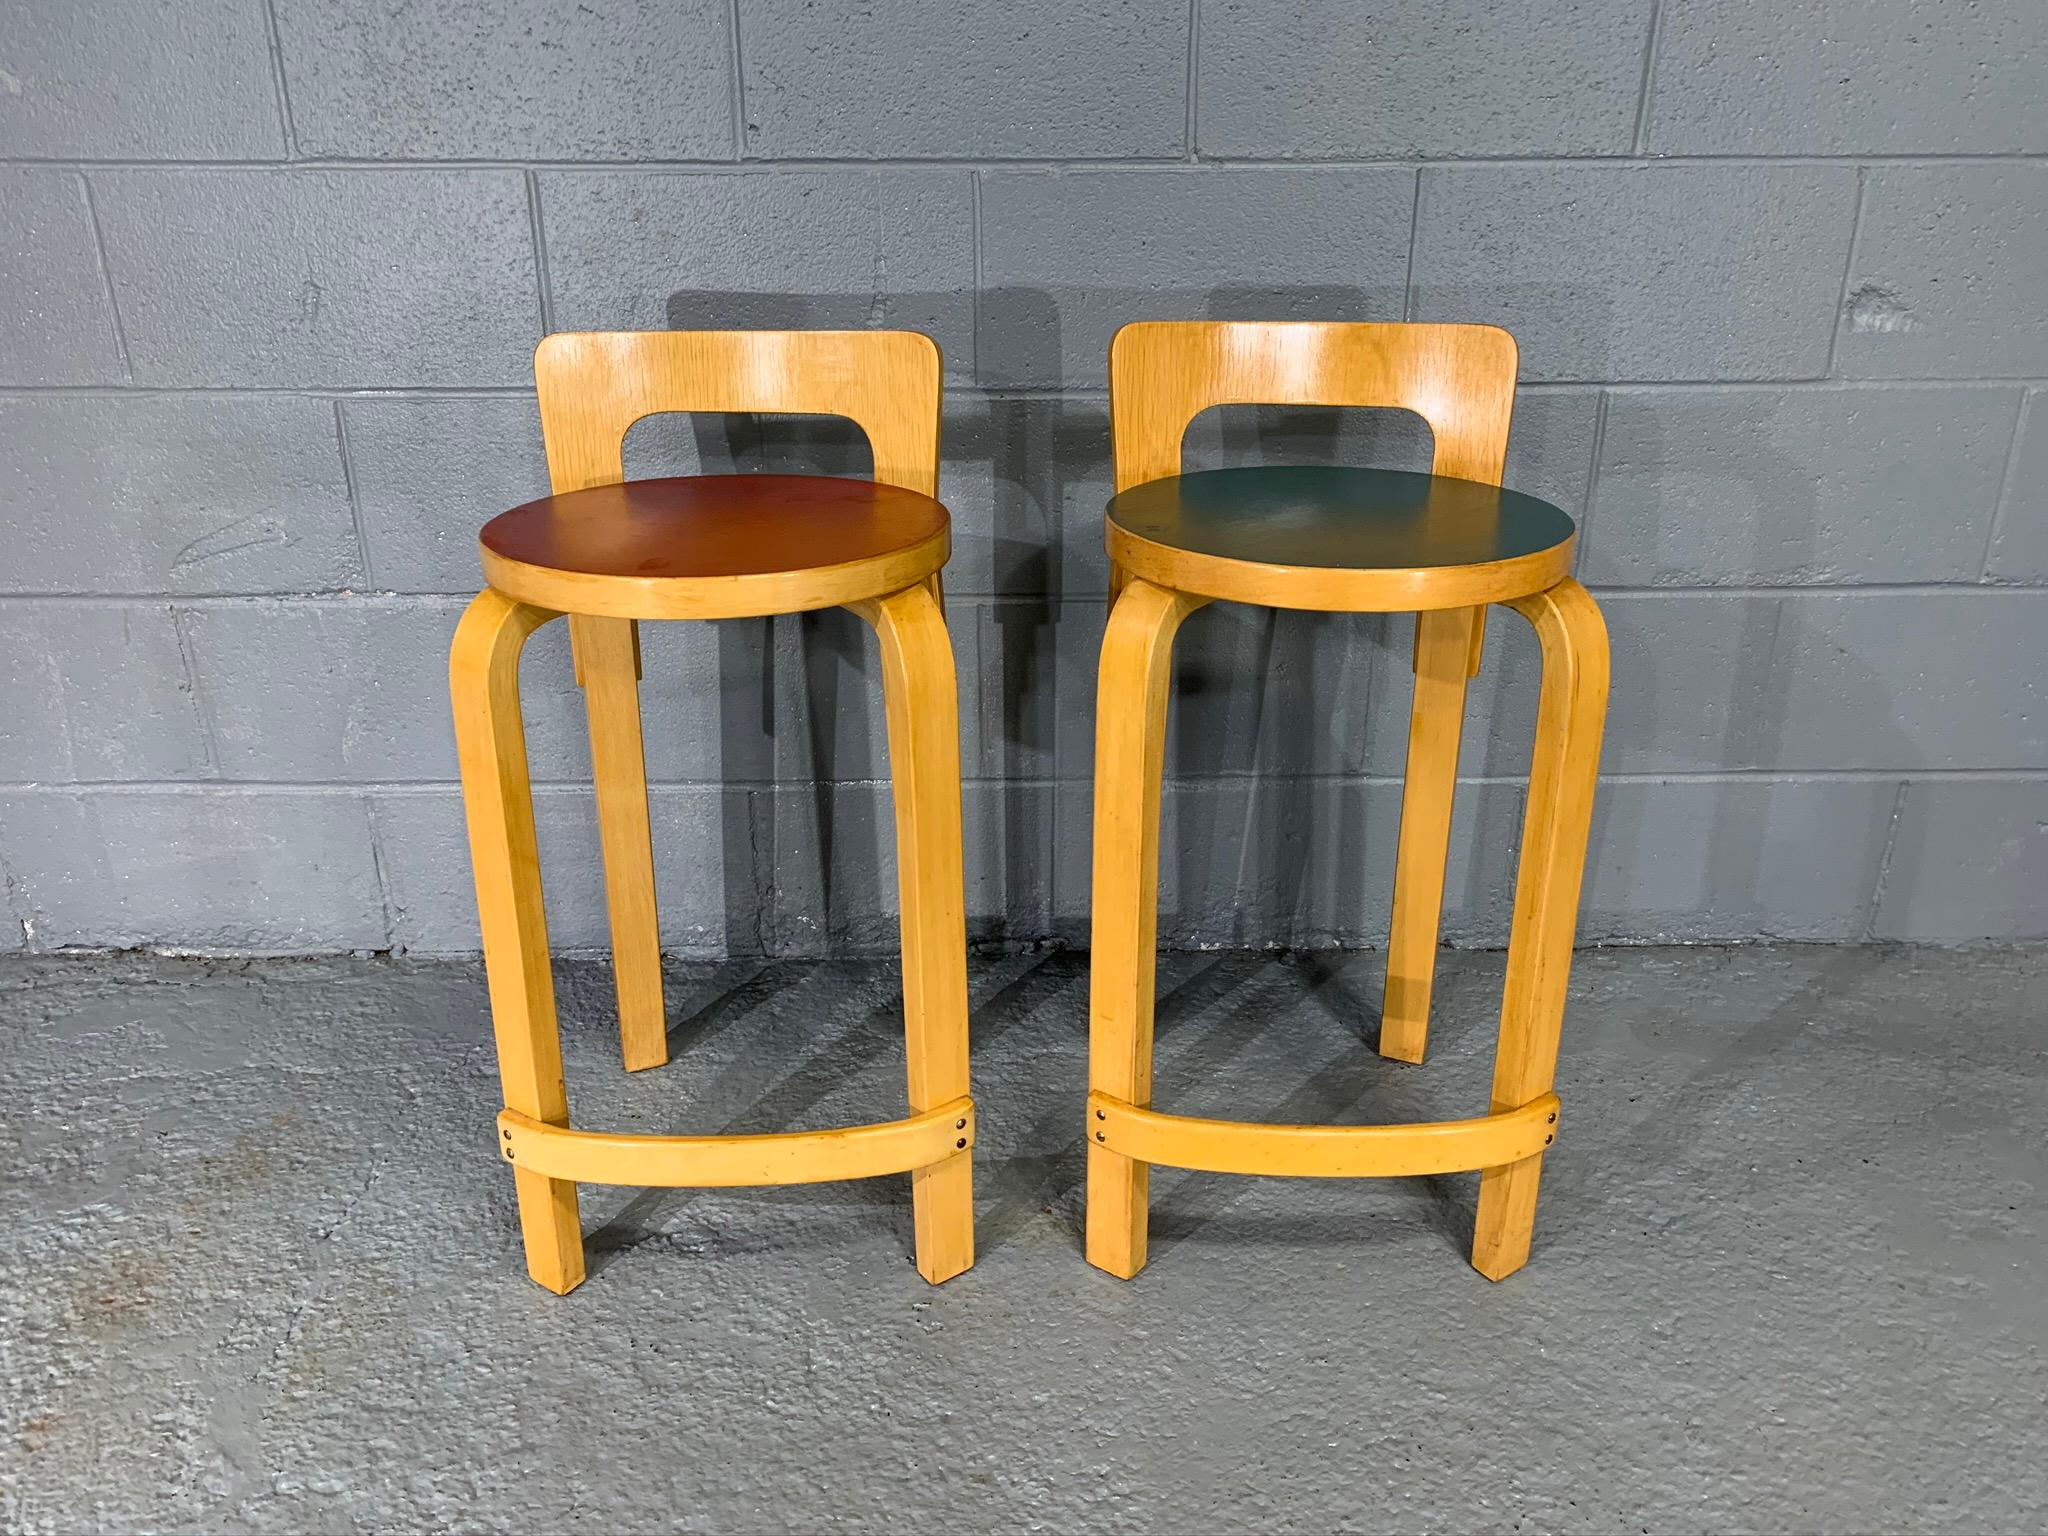 Pair of Finnish Mid-Century Modern Alvar Aalto bar stools / high chair for Artek, model K65. Made of birch with red and green linoleum in seating.